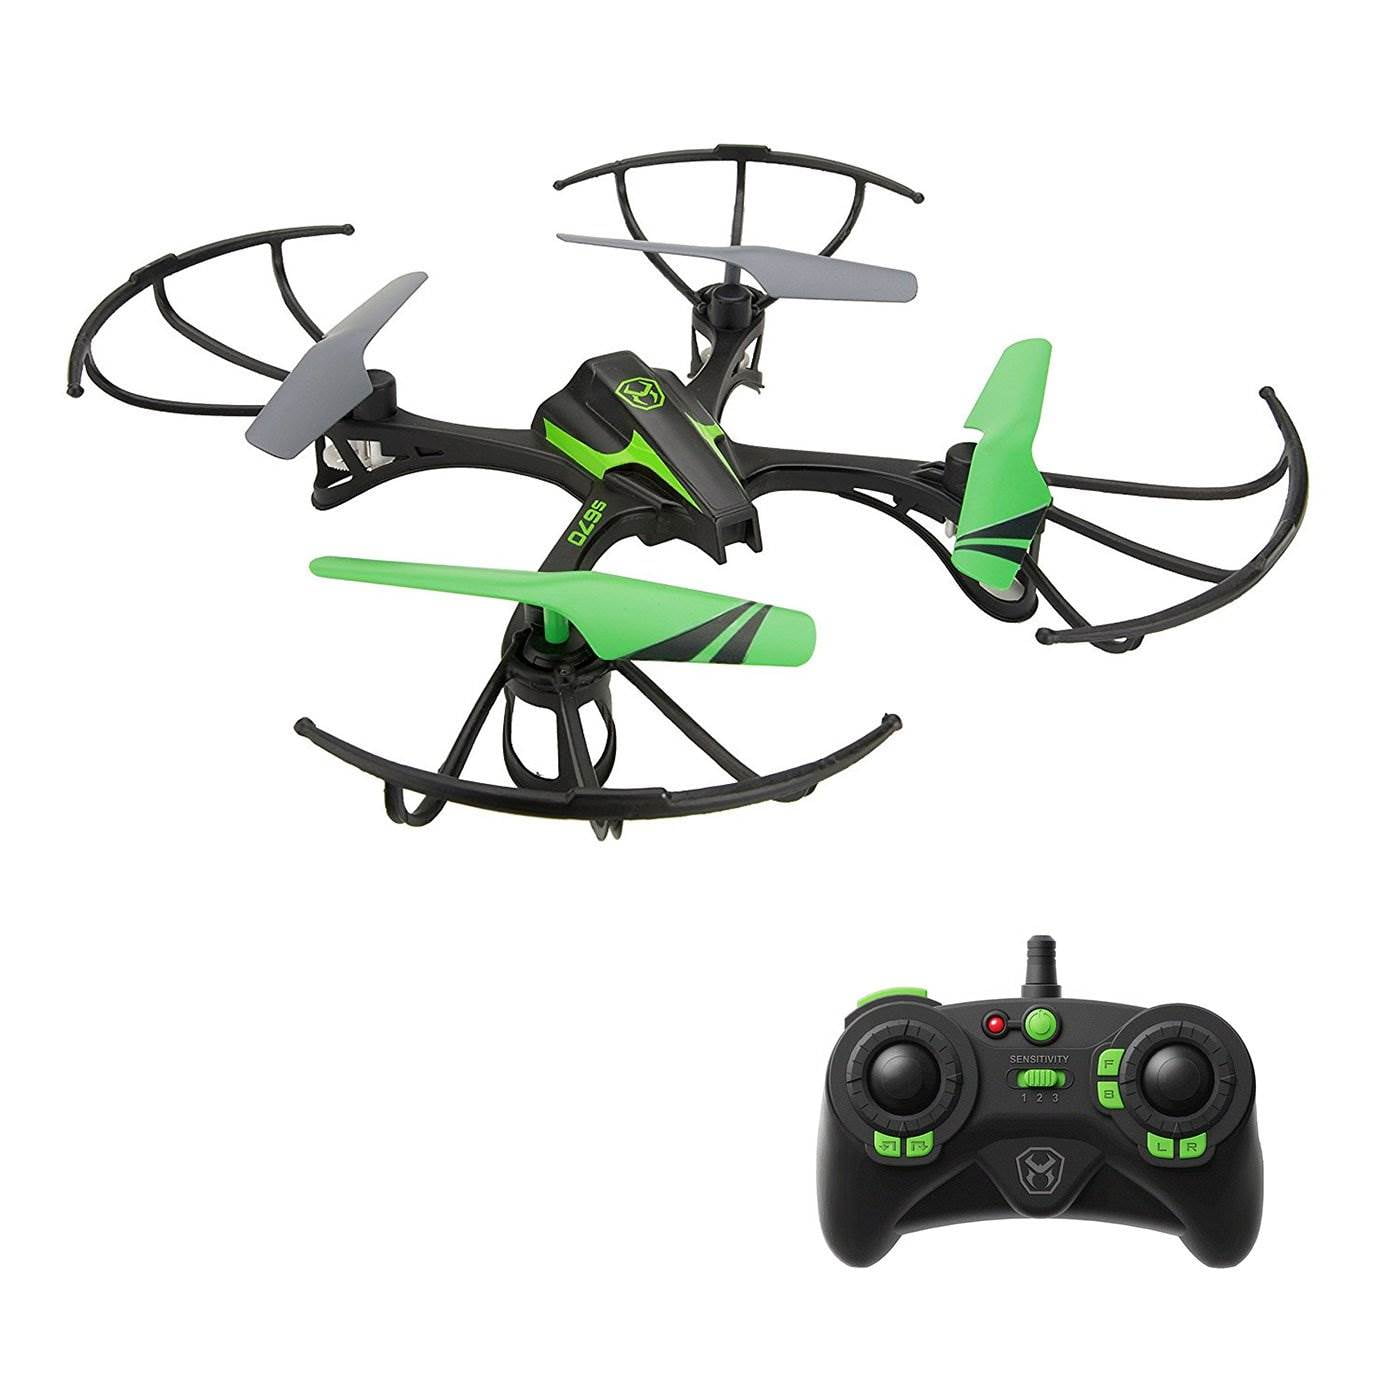 Sky Viper X Quad Stunt Drone Extreme Performanve Speeds up to 14 MPH 